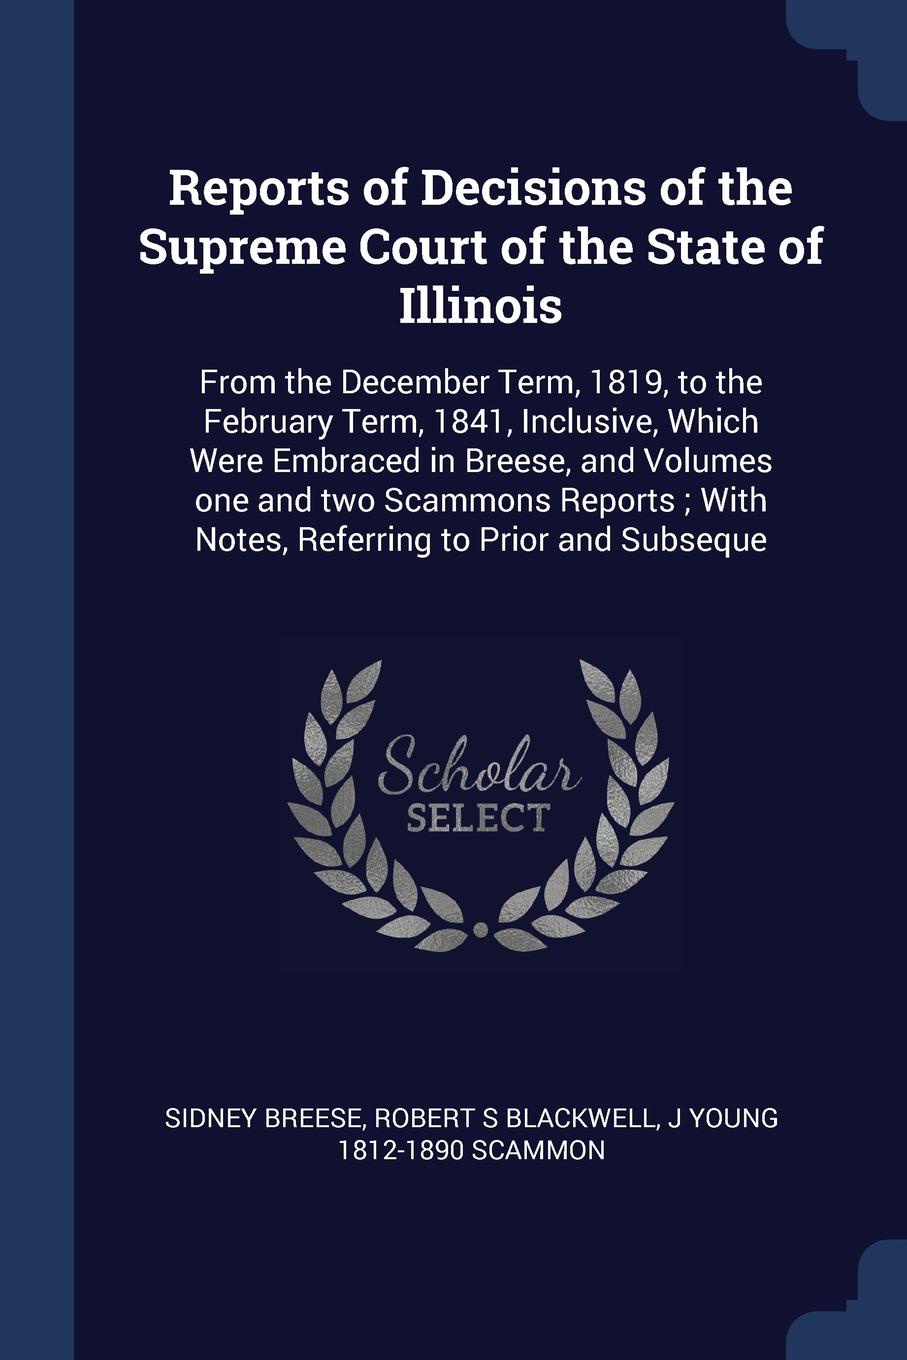 Reports of Decisions of the Supreme Court of the State of Illinois. From the December Term, 1819, to the February Term, 1841, Inclusive, Which Were Embraced in Breese, and Volumes one and two Scammons Reports ; With Notes, Referring to Prior and S...